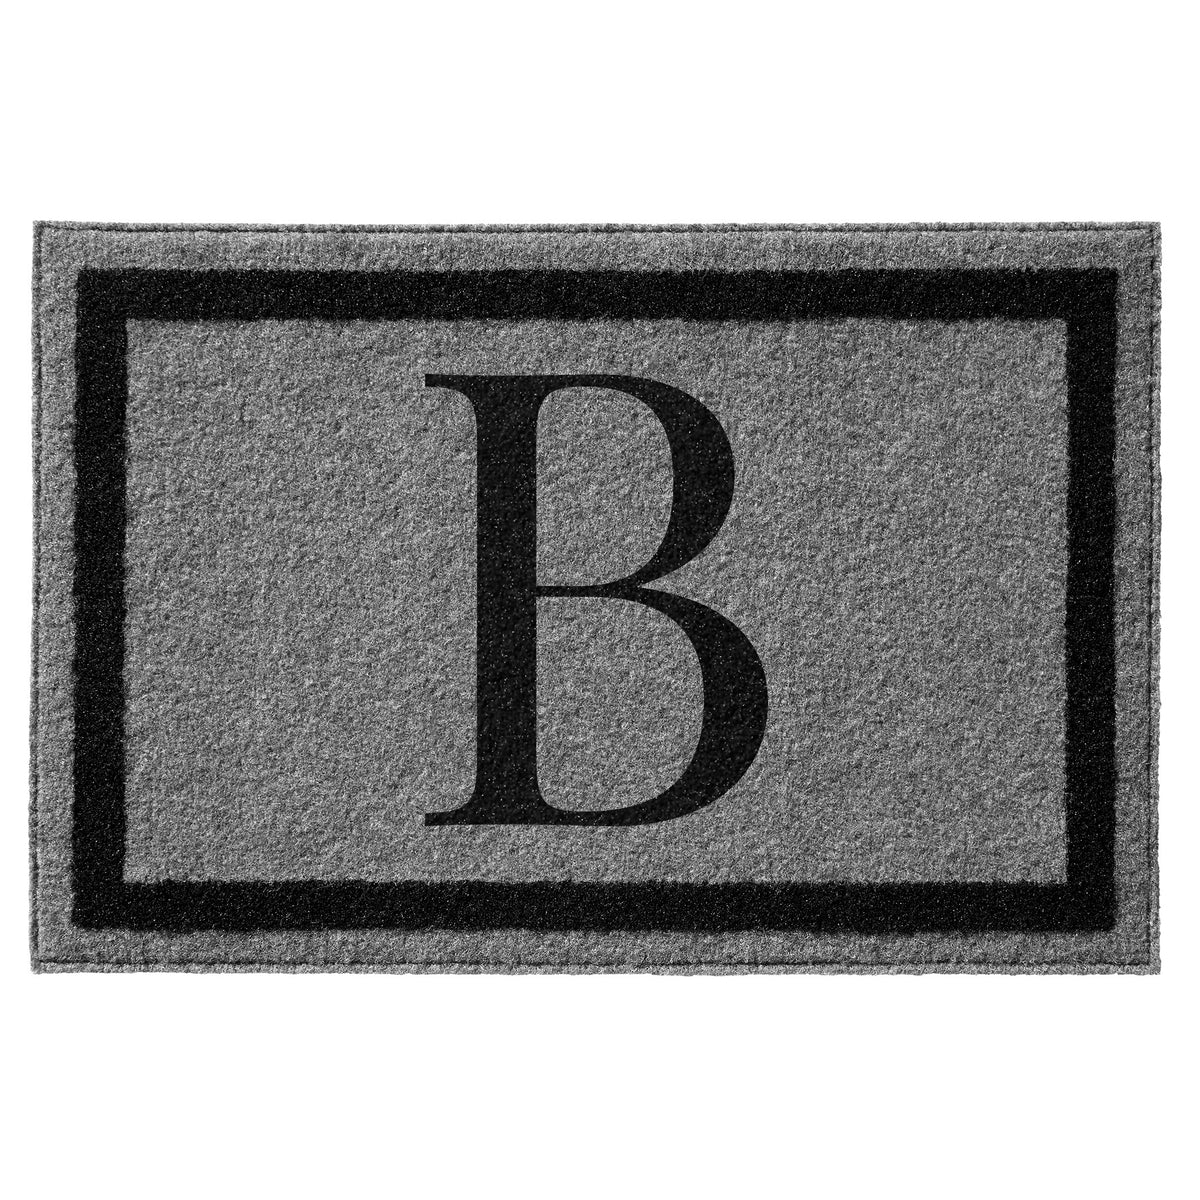 Infinity Custom Mats™ All-Weather Personalized Door Mat - STYLE: FARMHOUSE MONOGRAM COLOR: GREY / BLACK - rugsthatfit.com